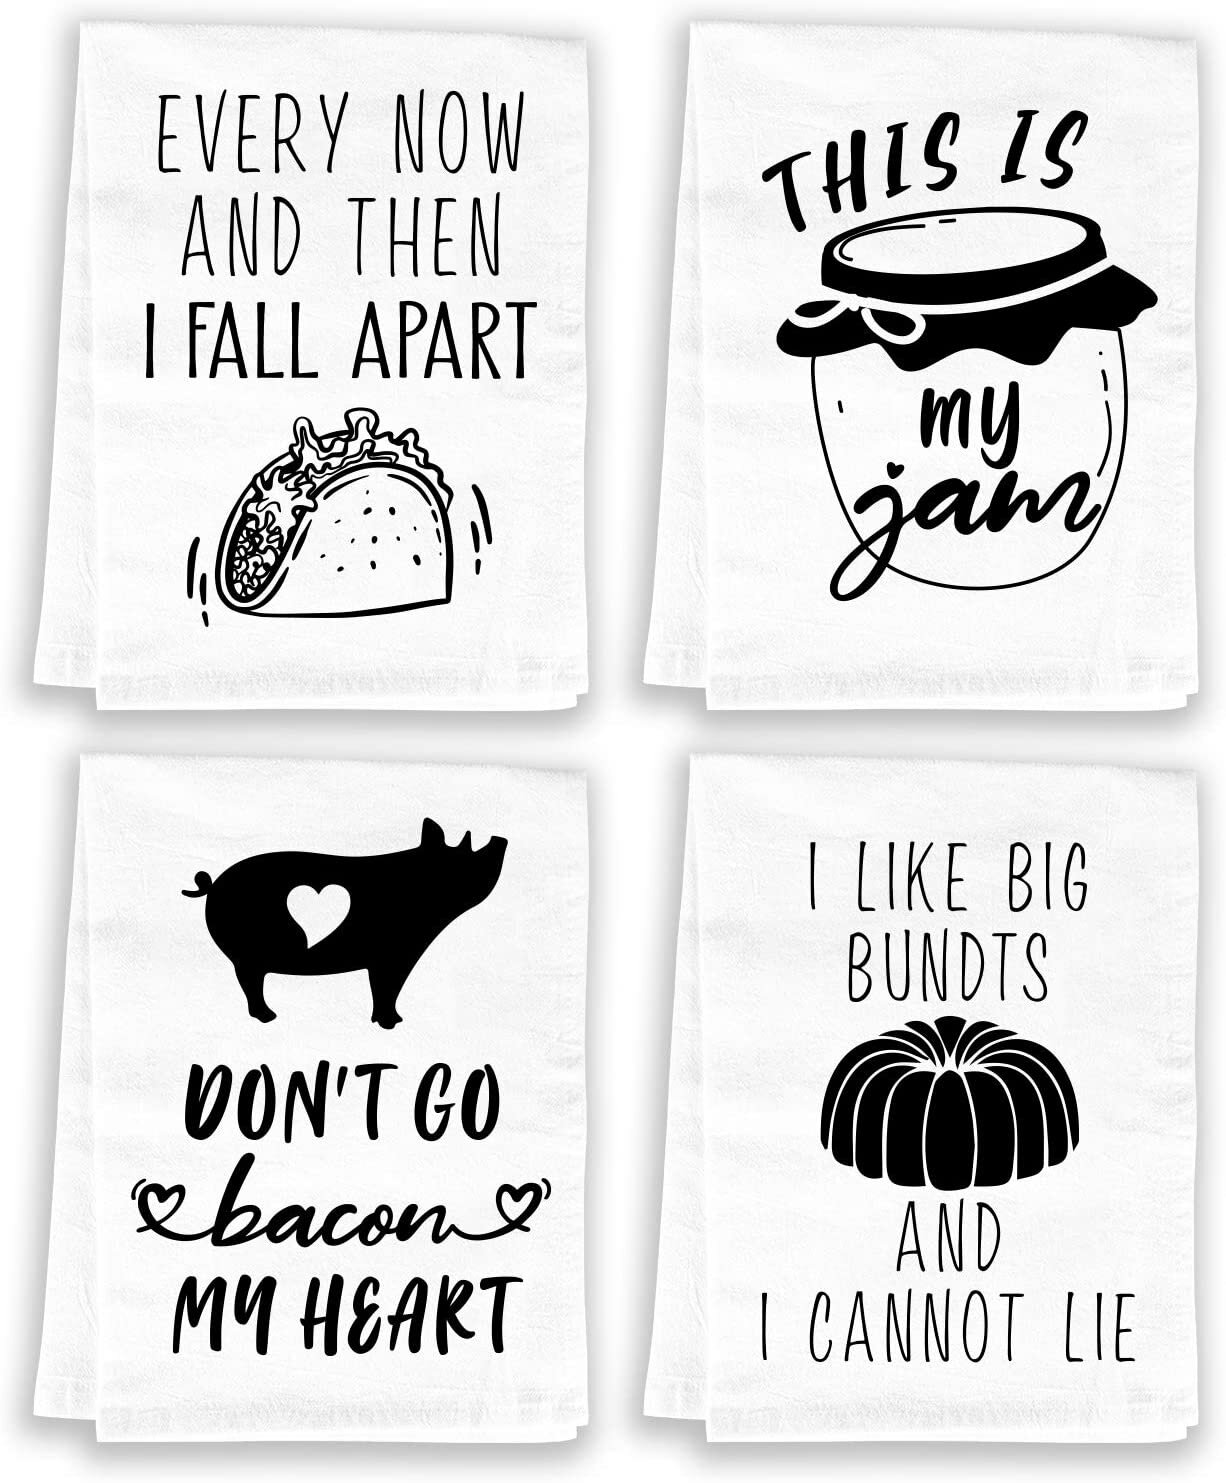 Lshuigen Funny Kitchen Towels And Dishcloths Sets Of 4 Mothers Day Housewarming Gifts House Warming Presents For New Home New House Cute Decorative Dish Towels Tea Towels Flour Sack Towels Wayfair